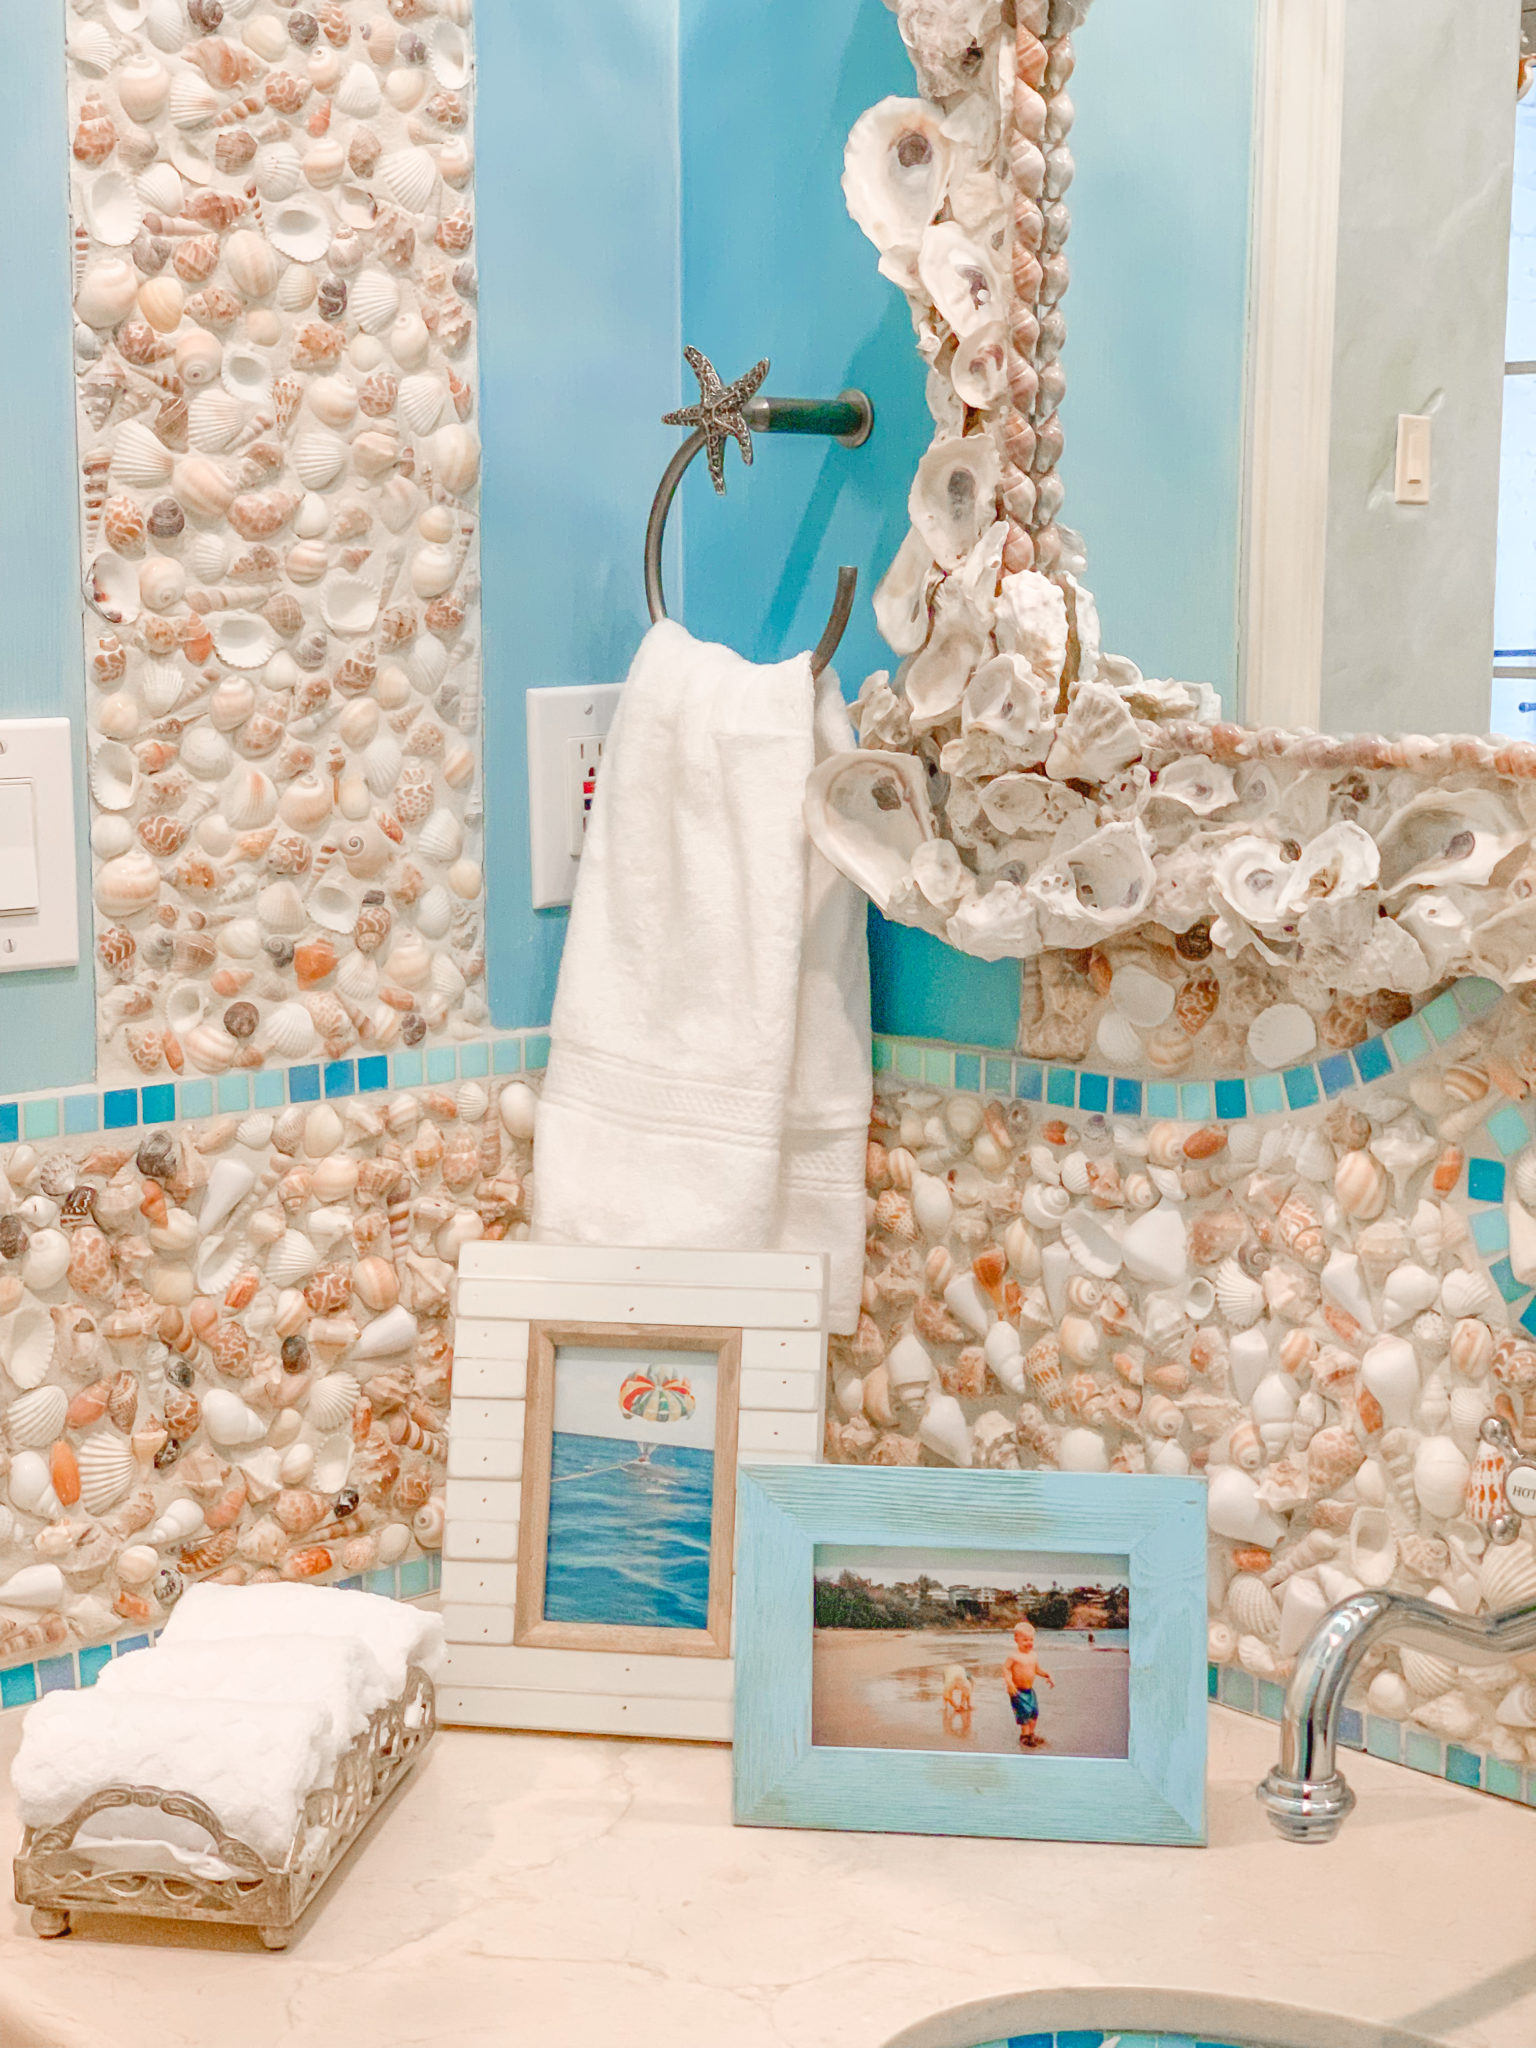 Come Take a Look at My Under the Sea Bathroom! | Turtle Creek Lane